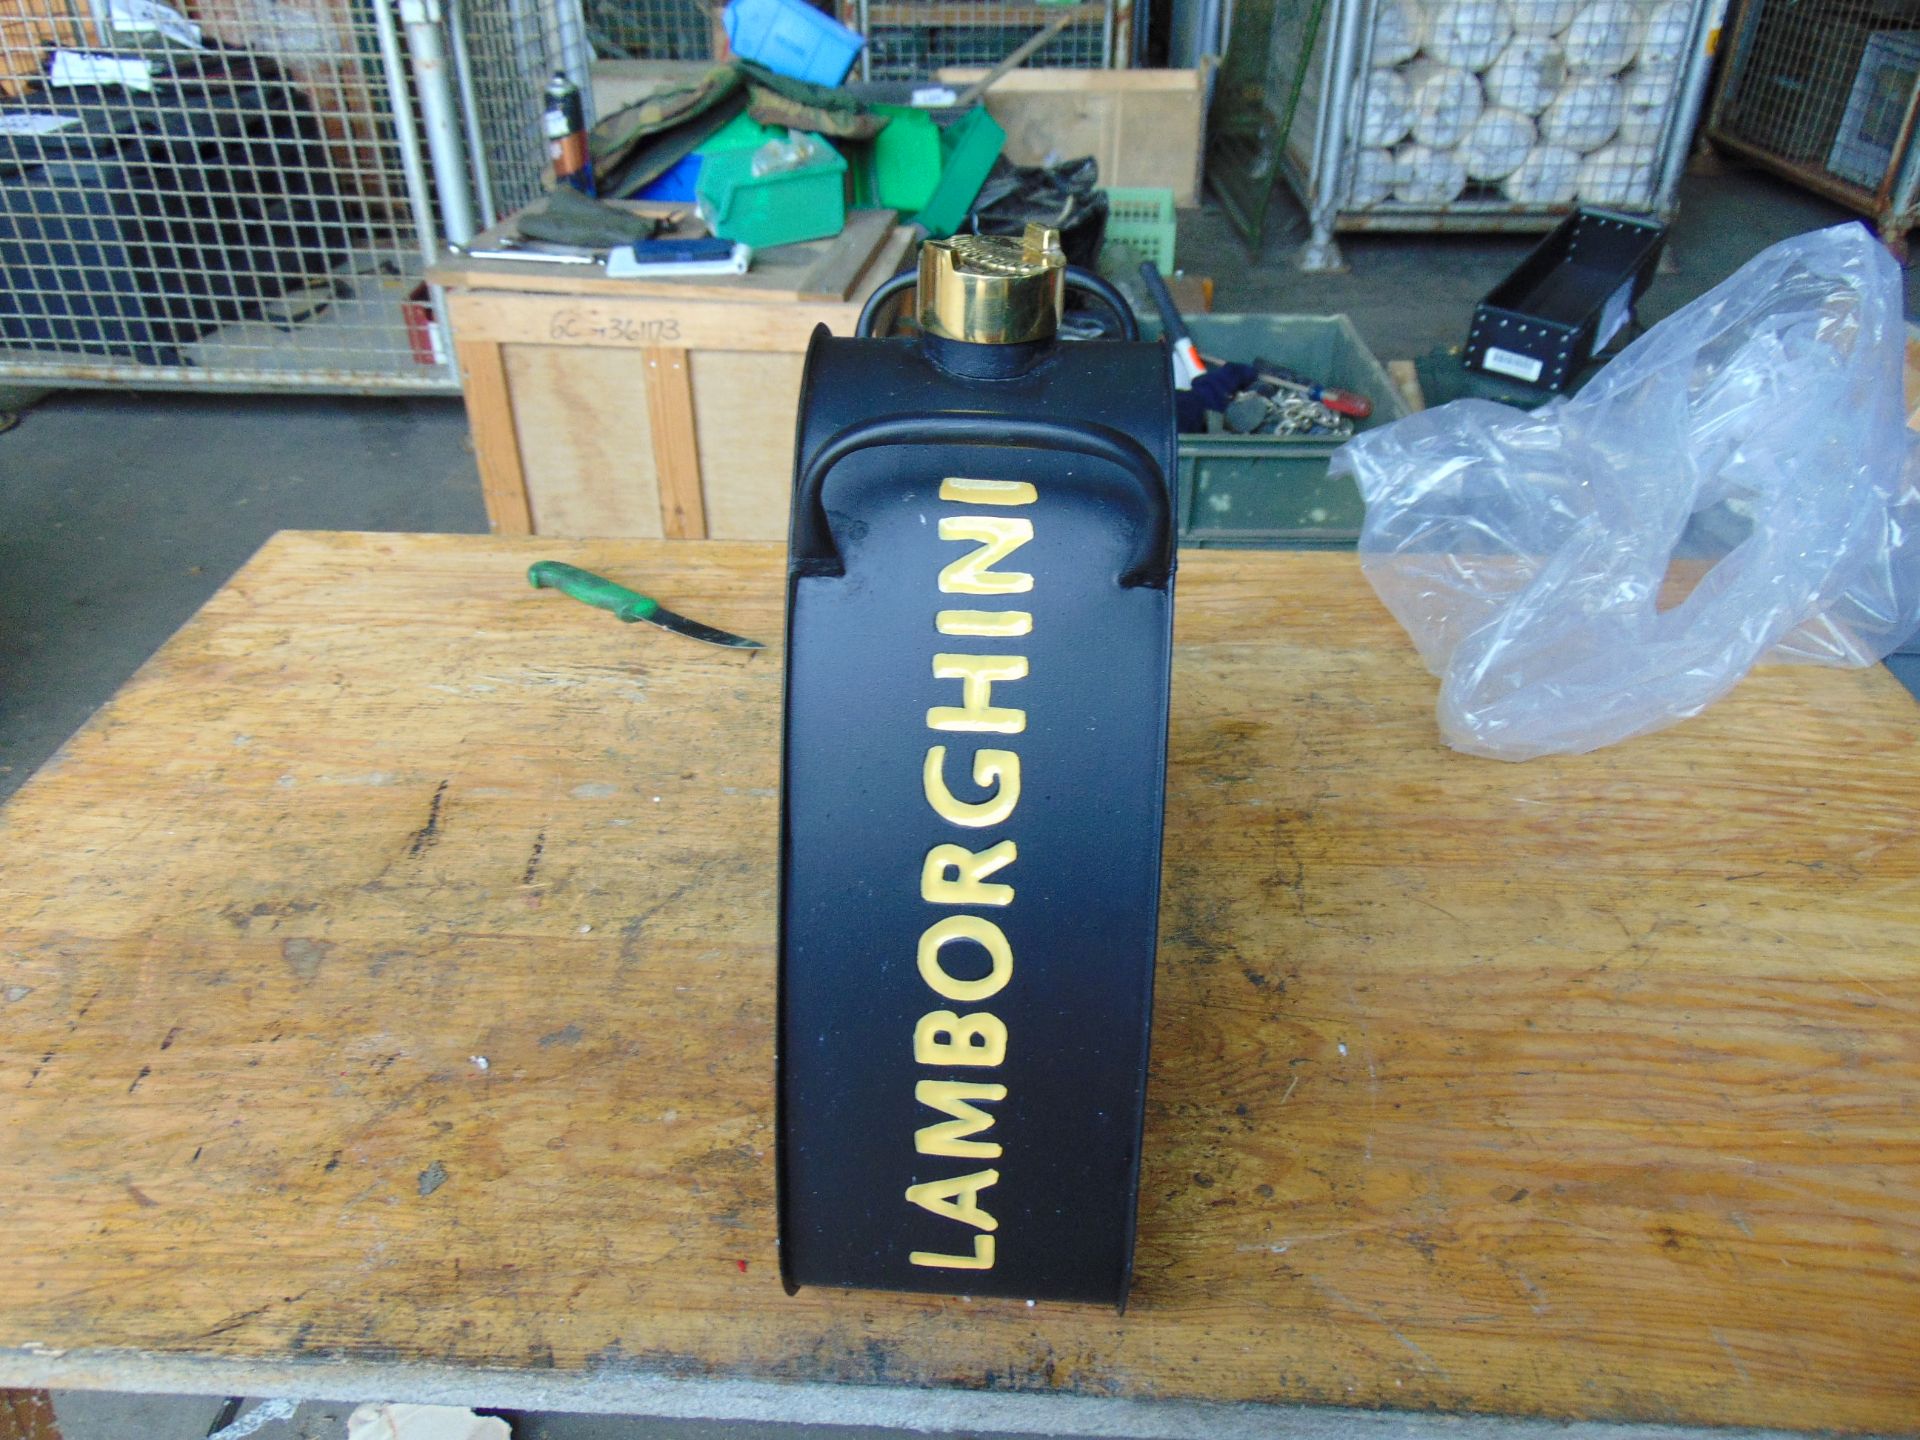 New Lamborghini Hand Painted Fuel/Oil Can with Brass Cap and Handles - Image 4 of 4